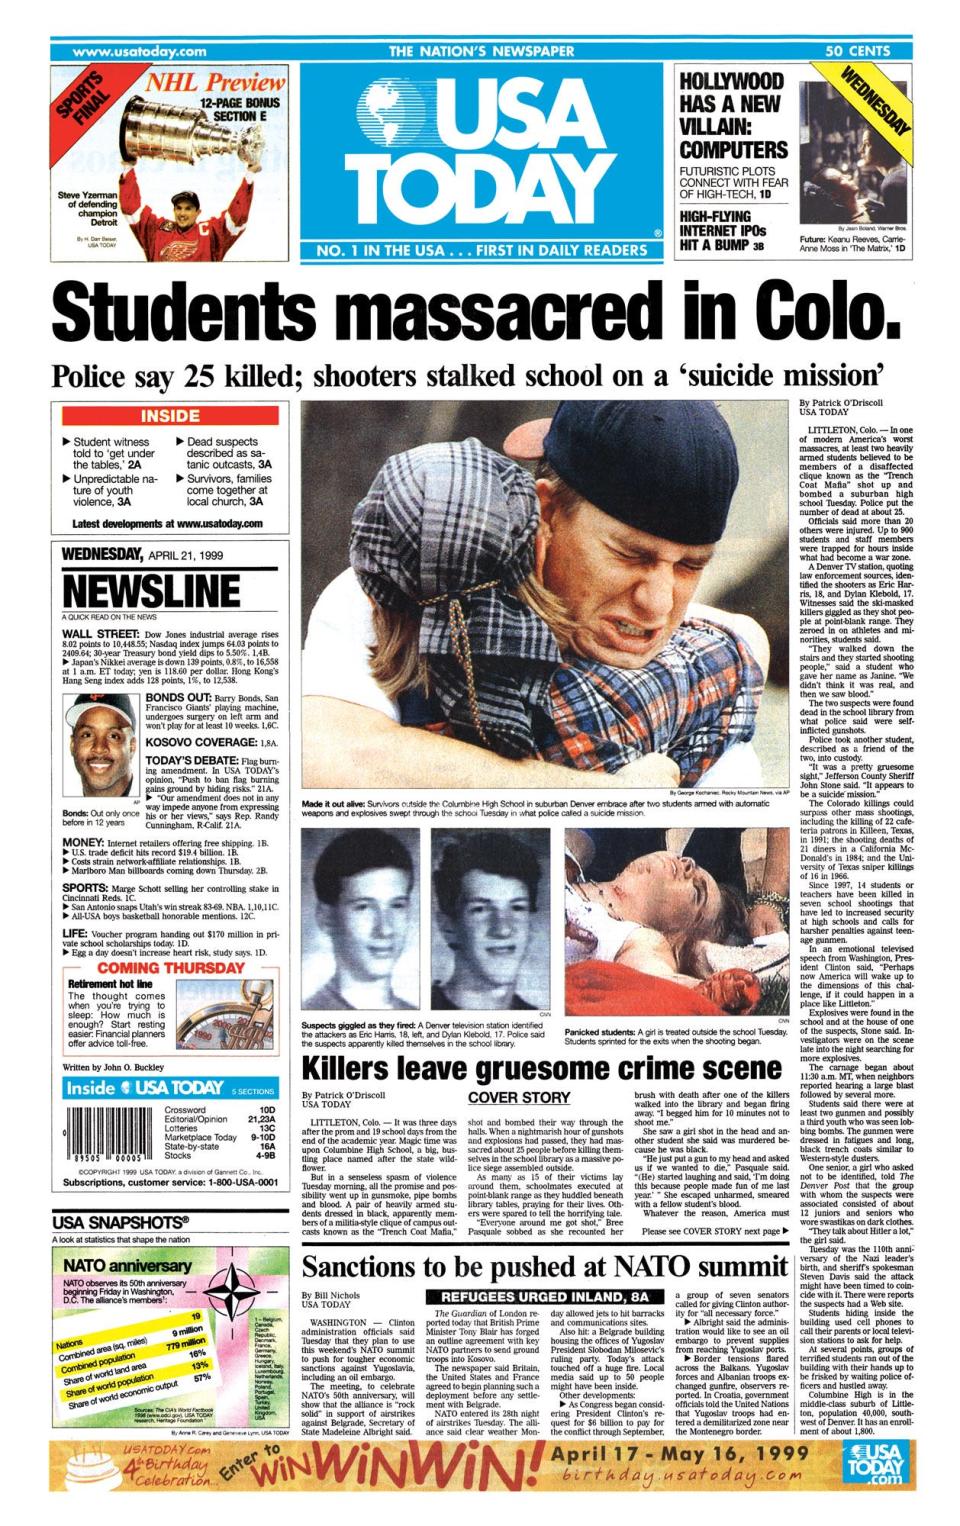 USA TODAY front page on April 21, 1999, the day after the Columbine High School shooting. At the time, details of the shooting remained unclear. Ultimately, the shooters killed 12 students and a coach before killing themselves.